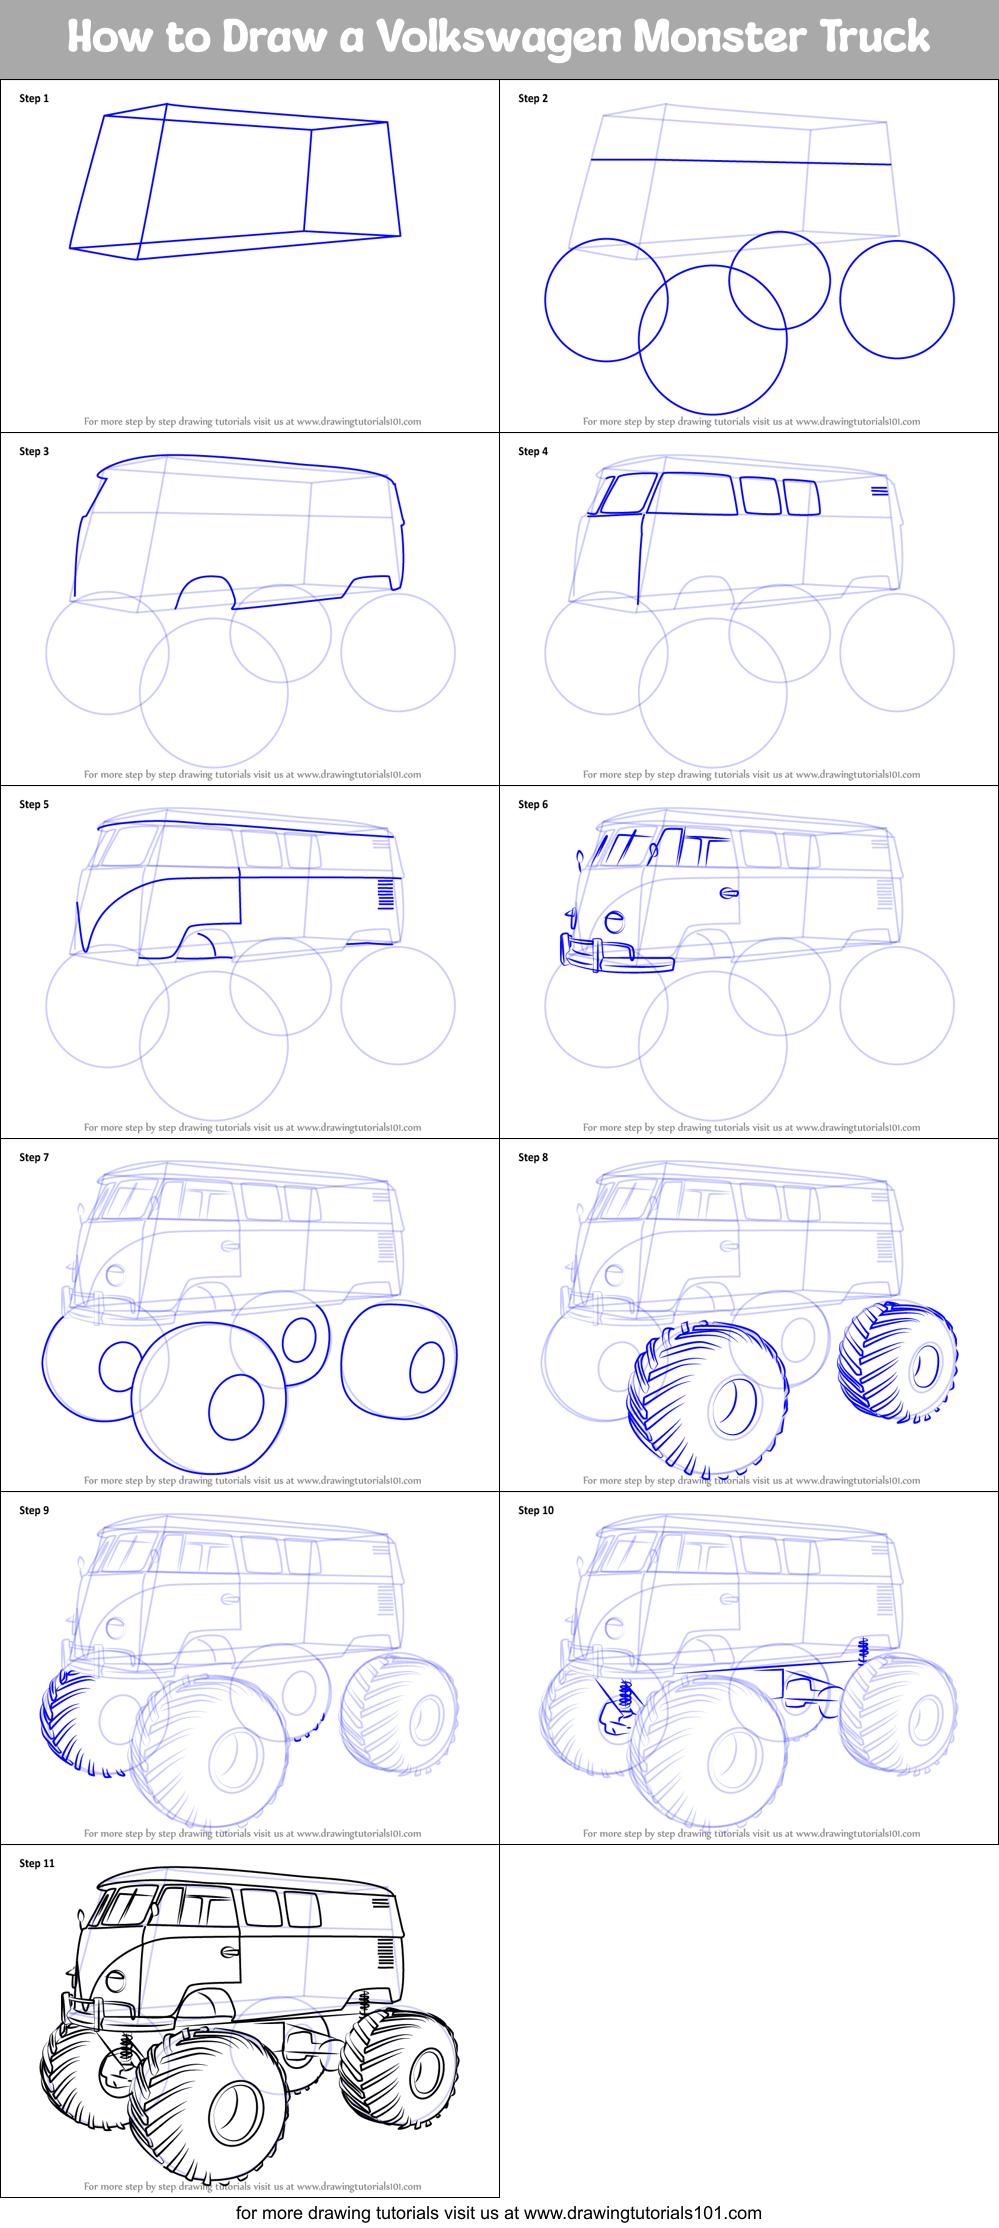 How to Draw a Volkswagen Monster Truck printable step by step drawing